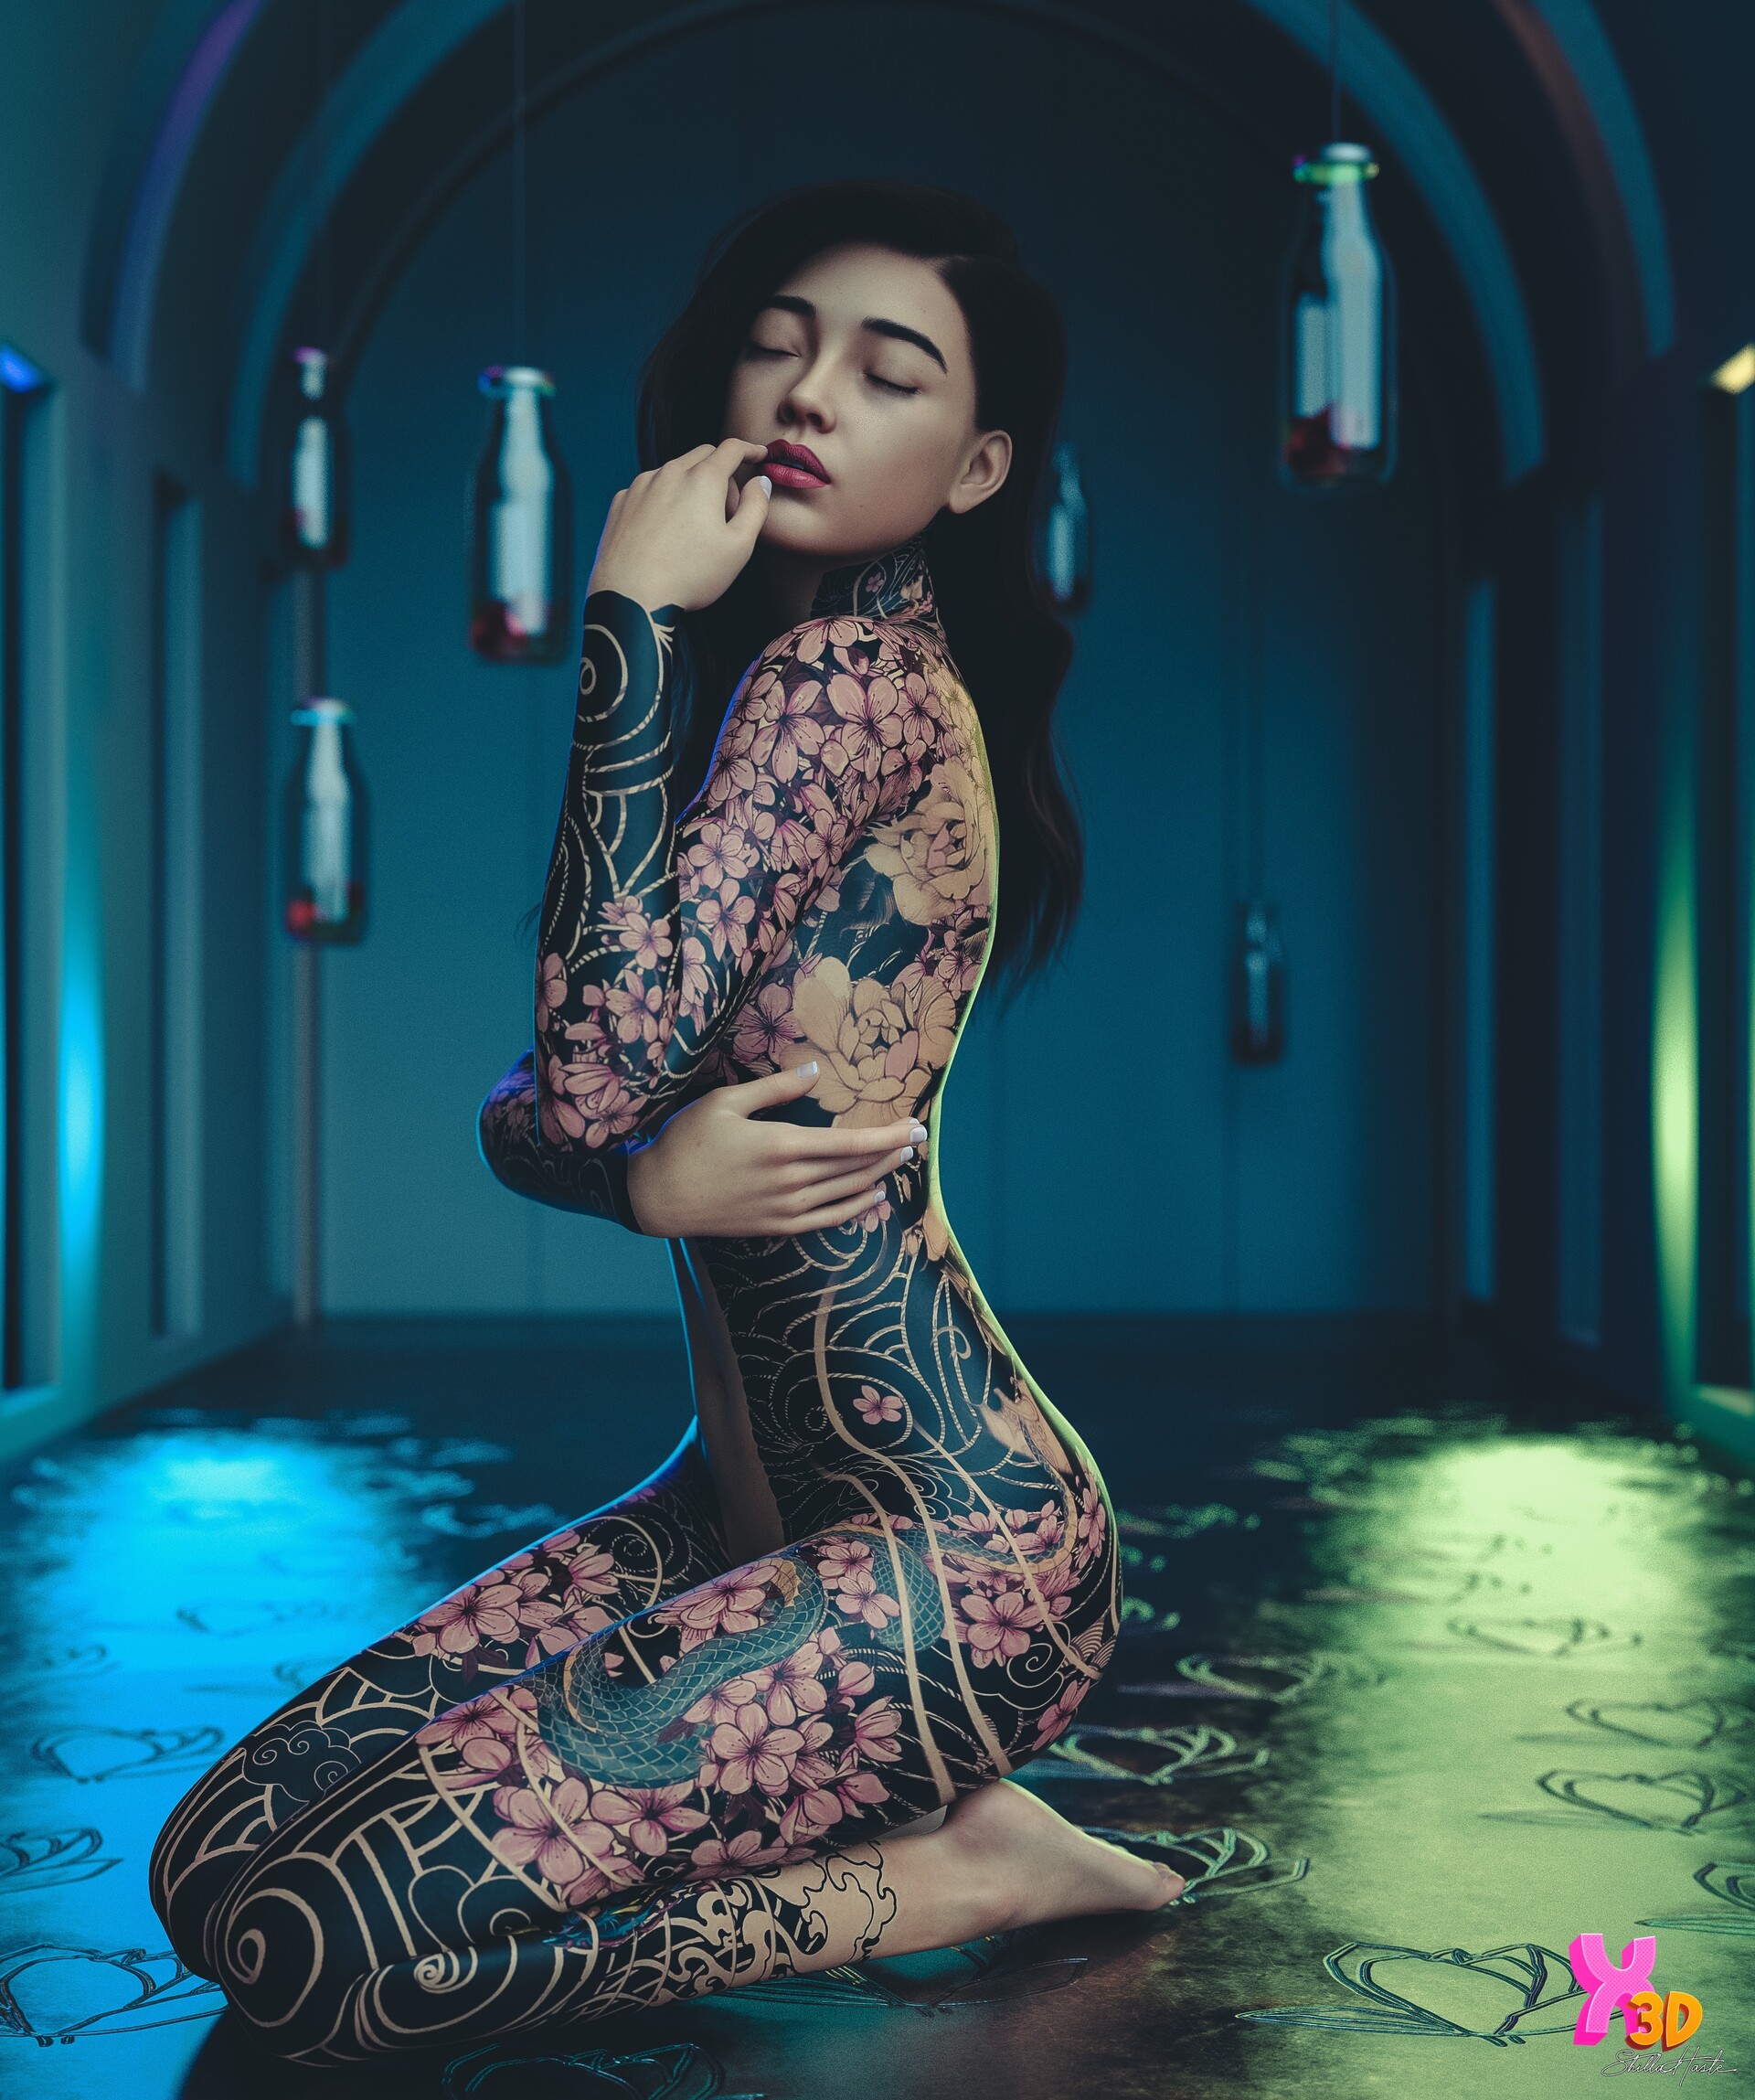 InkfromAsia on Instagram Beautiful Japanese styled body suit tattoos by  tomatattoo  For more tattoos like this give this amazing tattoo artist  a follow japanesetattoo tattoo dragontattoo bodysuittattoo inktattoo